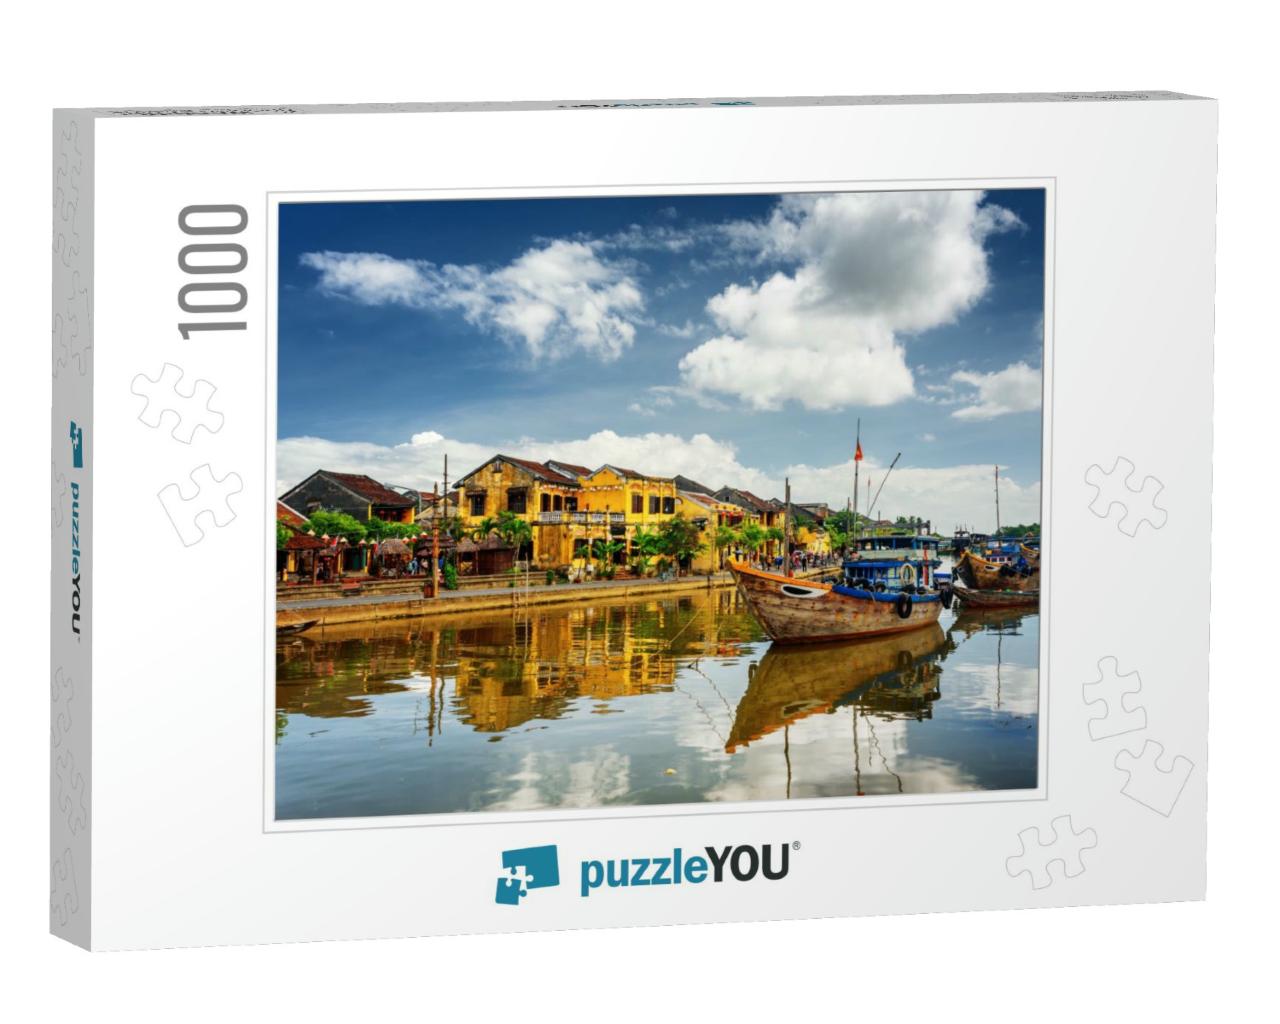 Wooden Boats on the Thu Bon River in Hoi an Ancient Town... Jigsaw Puzzle with 1000 pieces